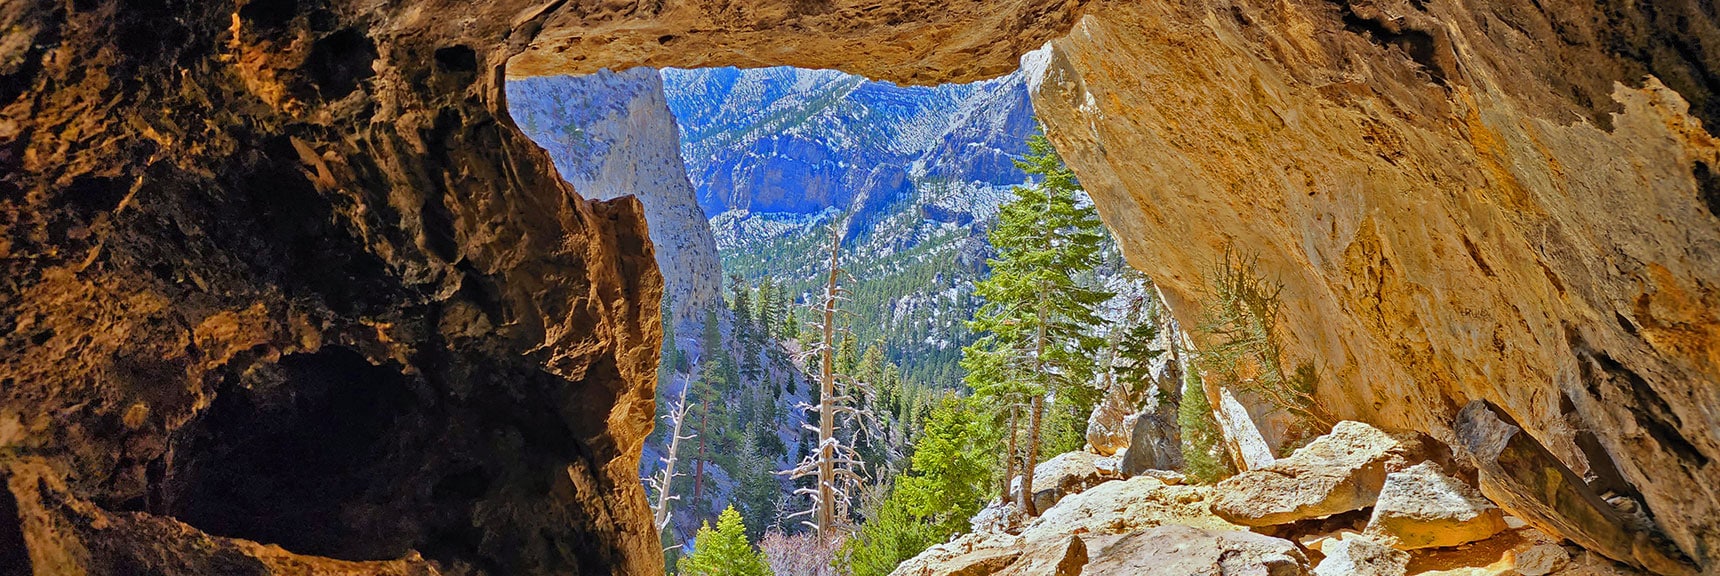 Canyon View Framed Through Cave Opening | Mary Jane Falls | Mt. Charleston Wilderness | Spring Mountains, Nevada